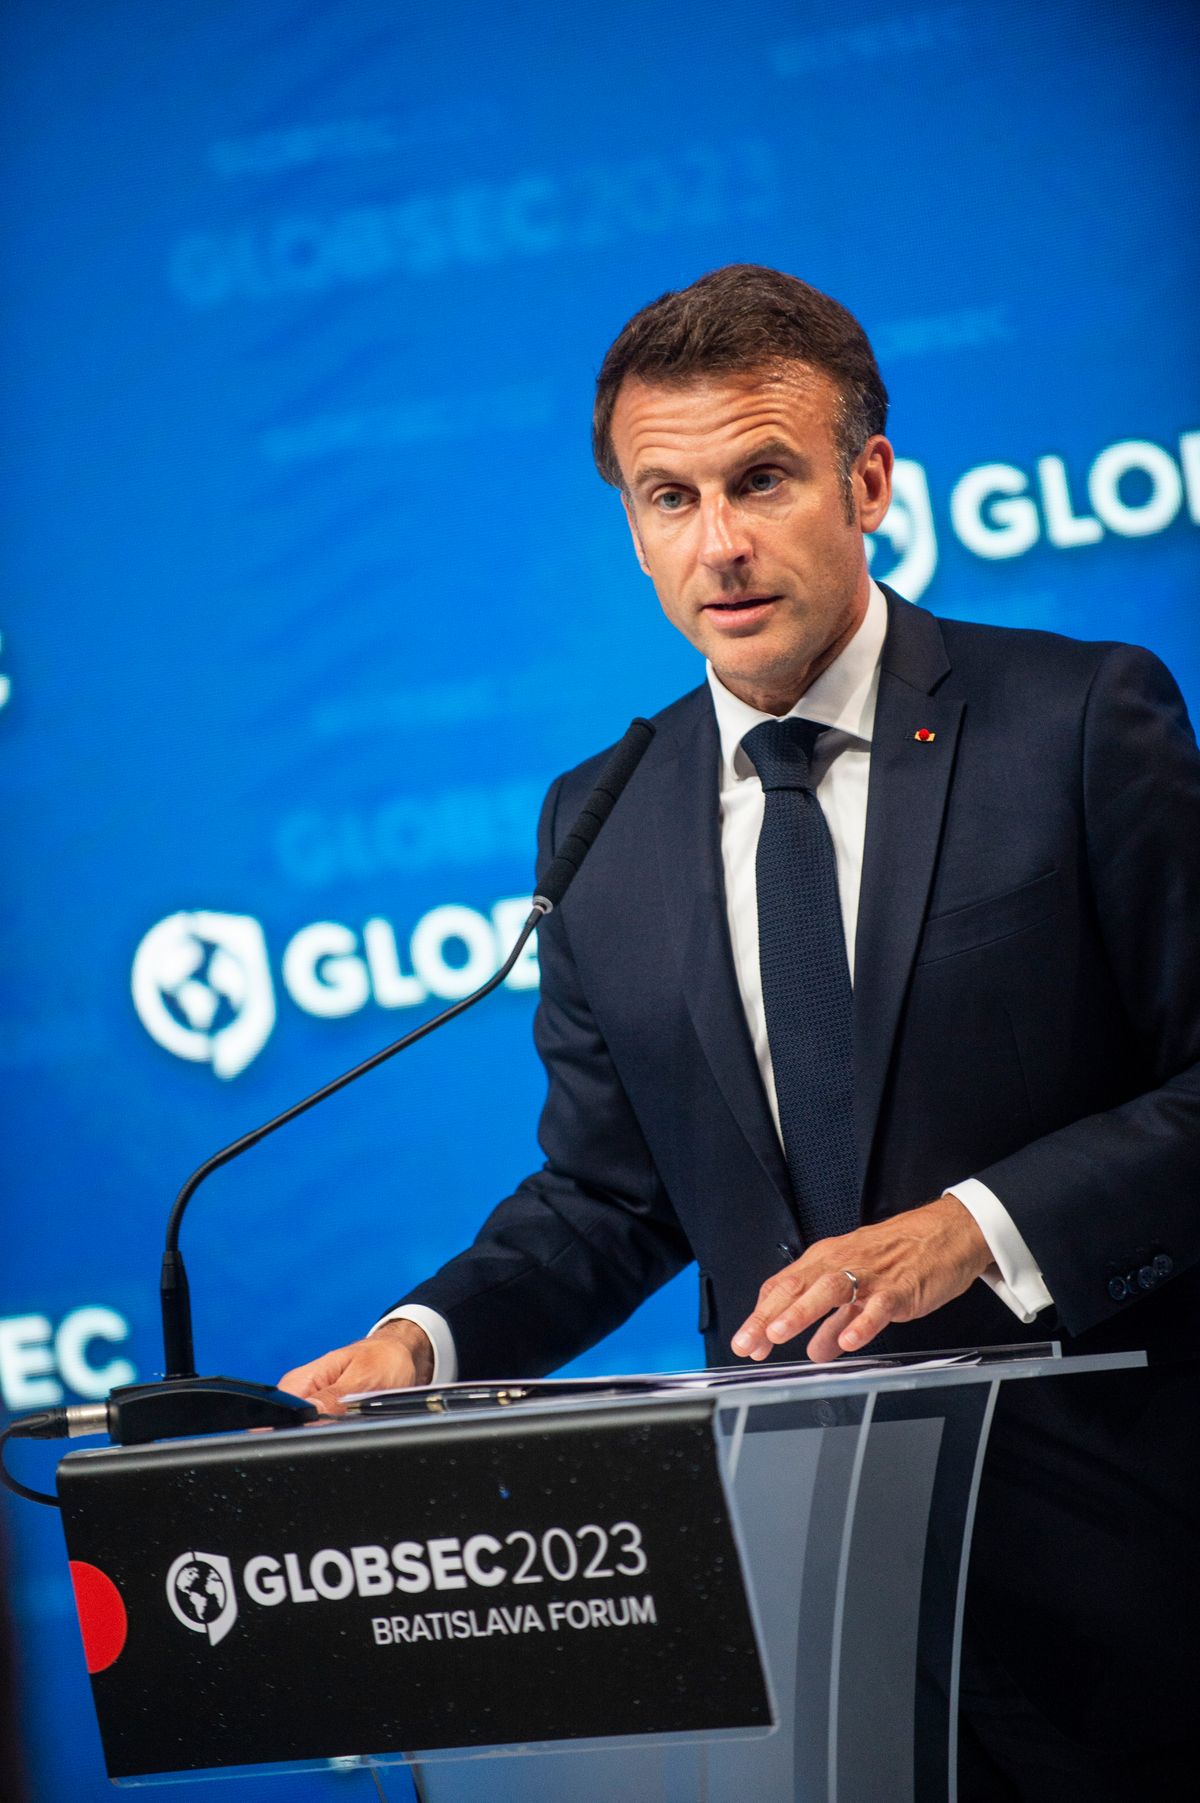 Macron at Globsec: Europe Mustn't Allow Russia to Undermine Its Unity & Security